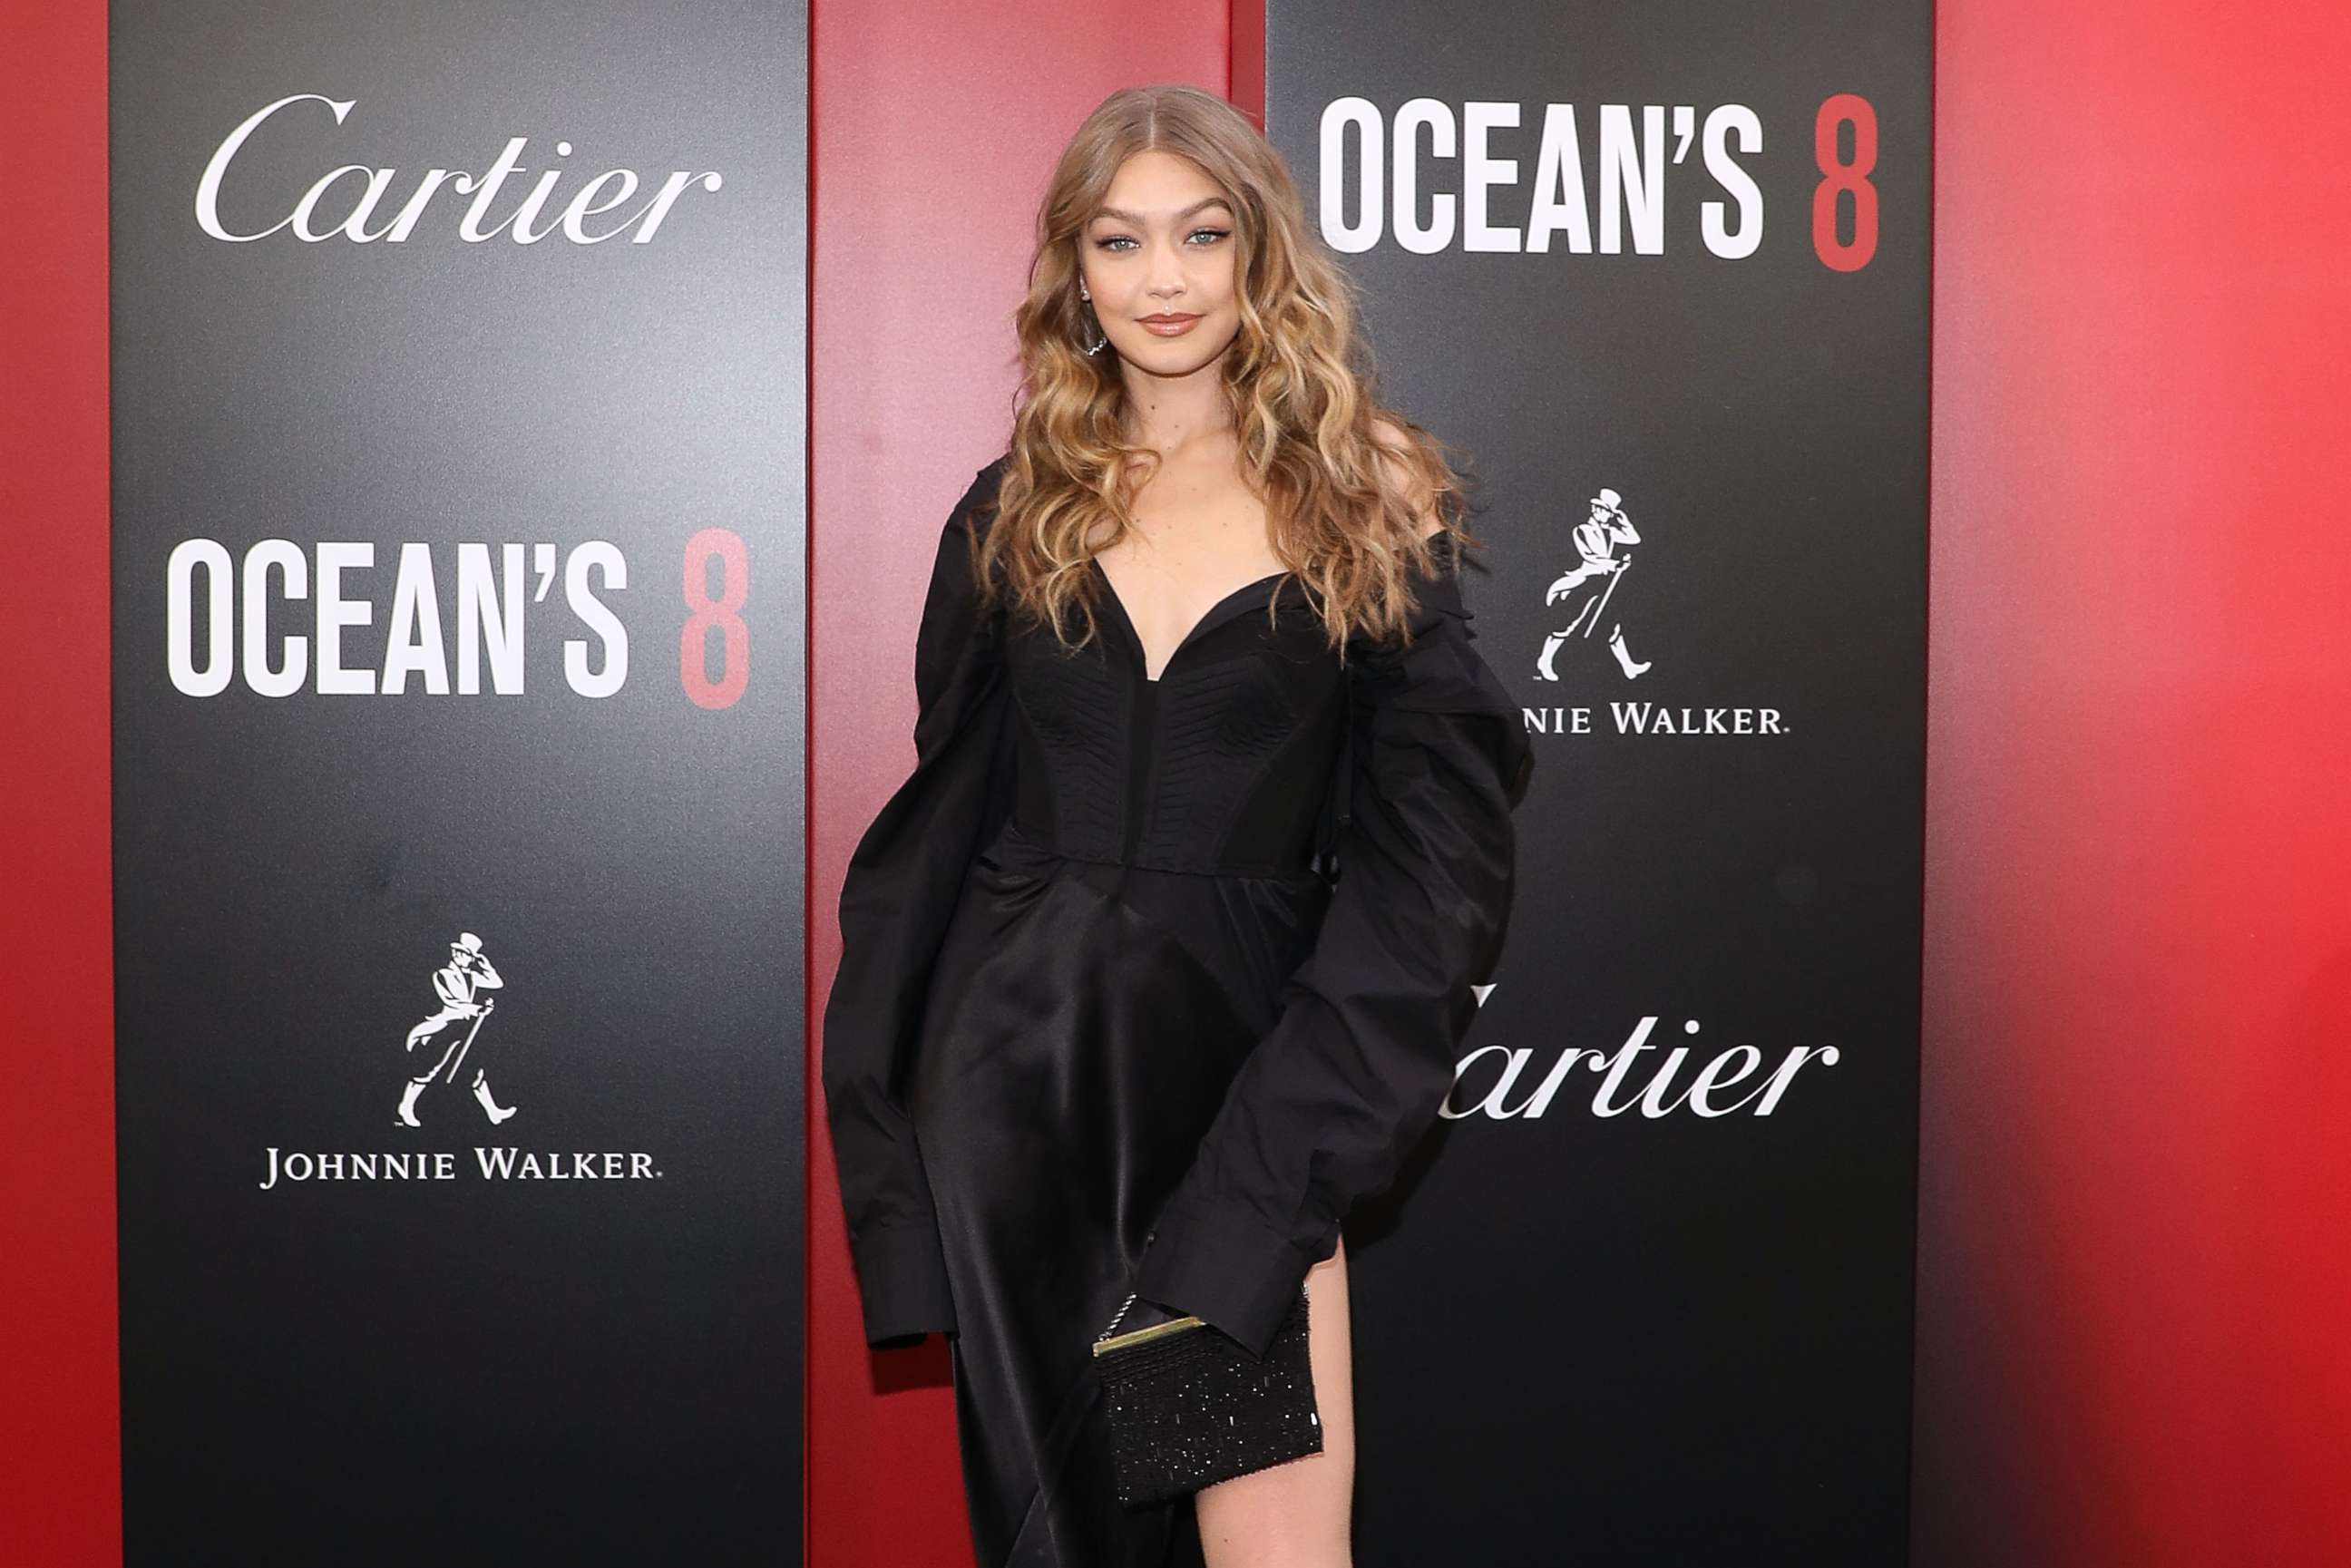 PHOTO: Gigi Hadid attends the world premiere of "Ocean's 8" at Alice Tully Hall at Lincoln Center, June 5, 2018, in New York City.